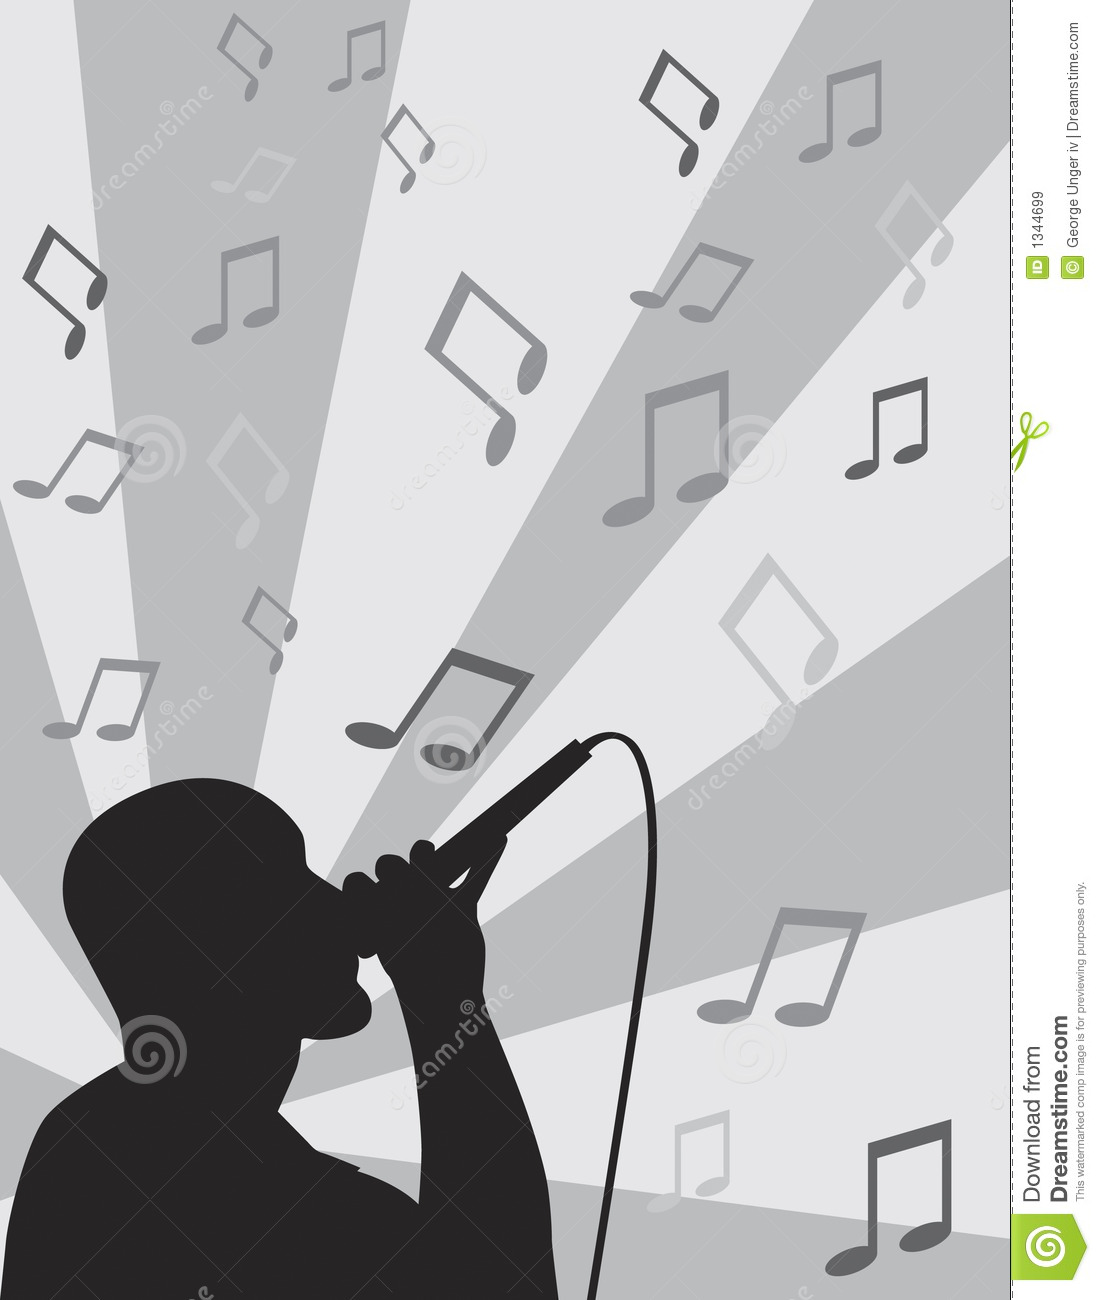 Solo Singer Royalty Free Stock Images   Image  1344699